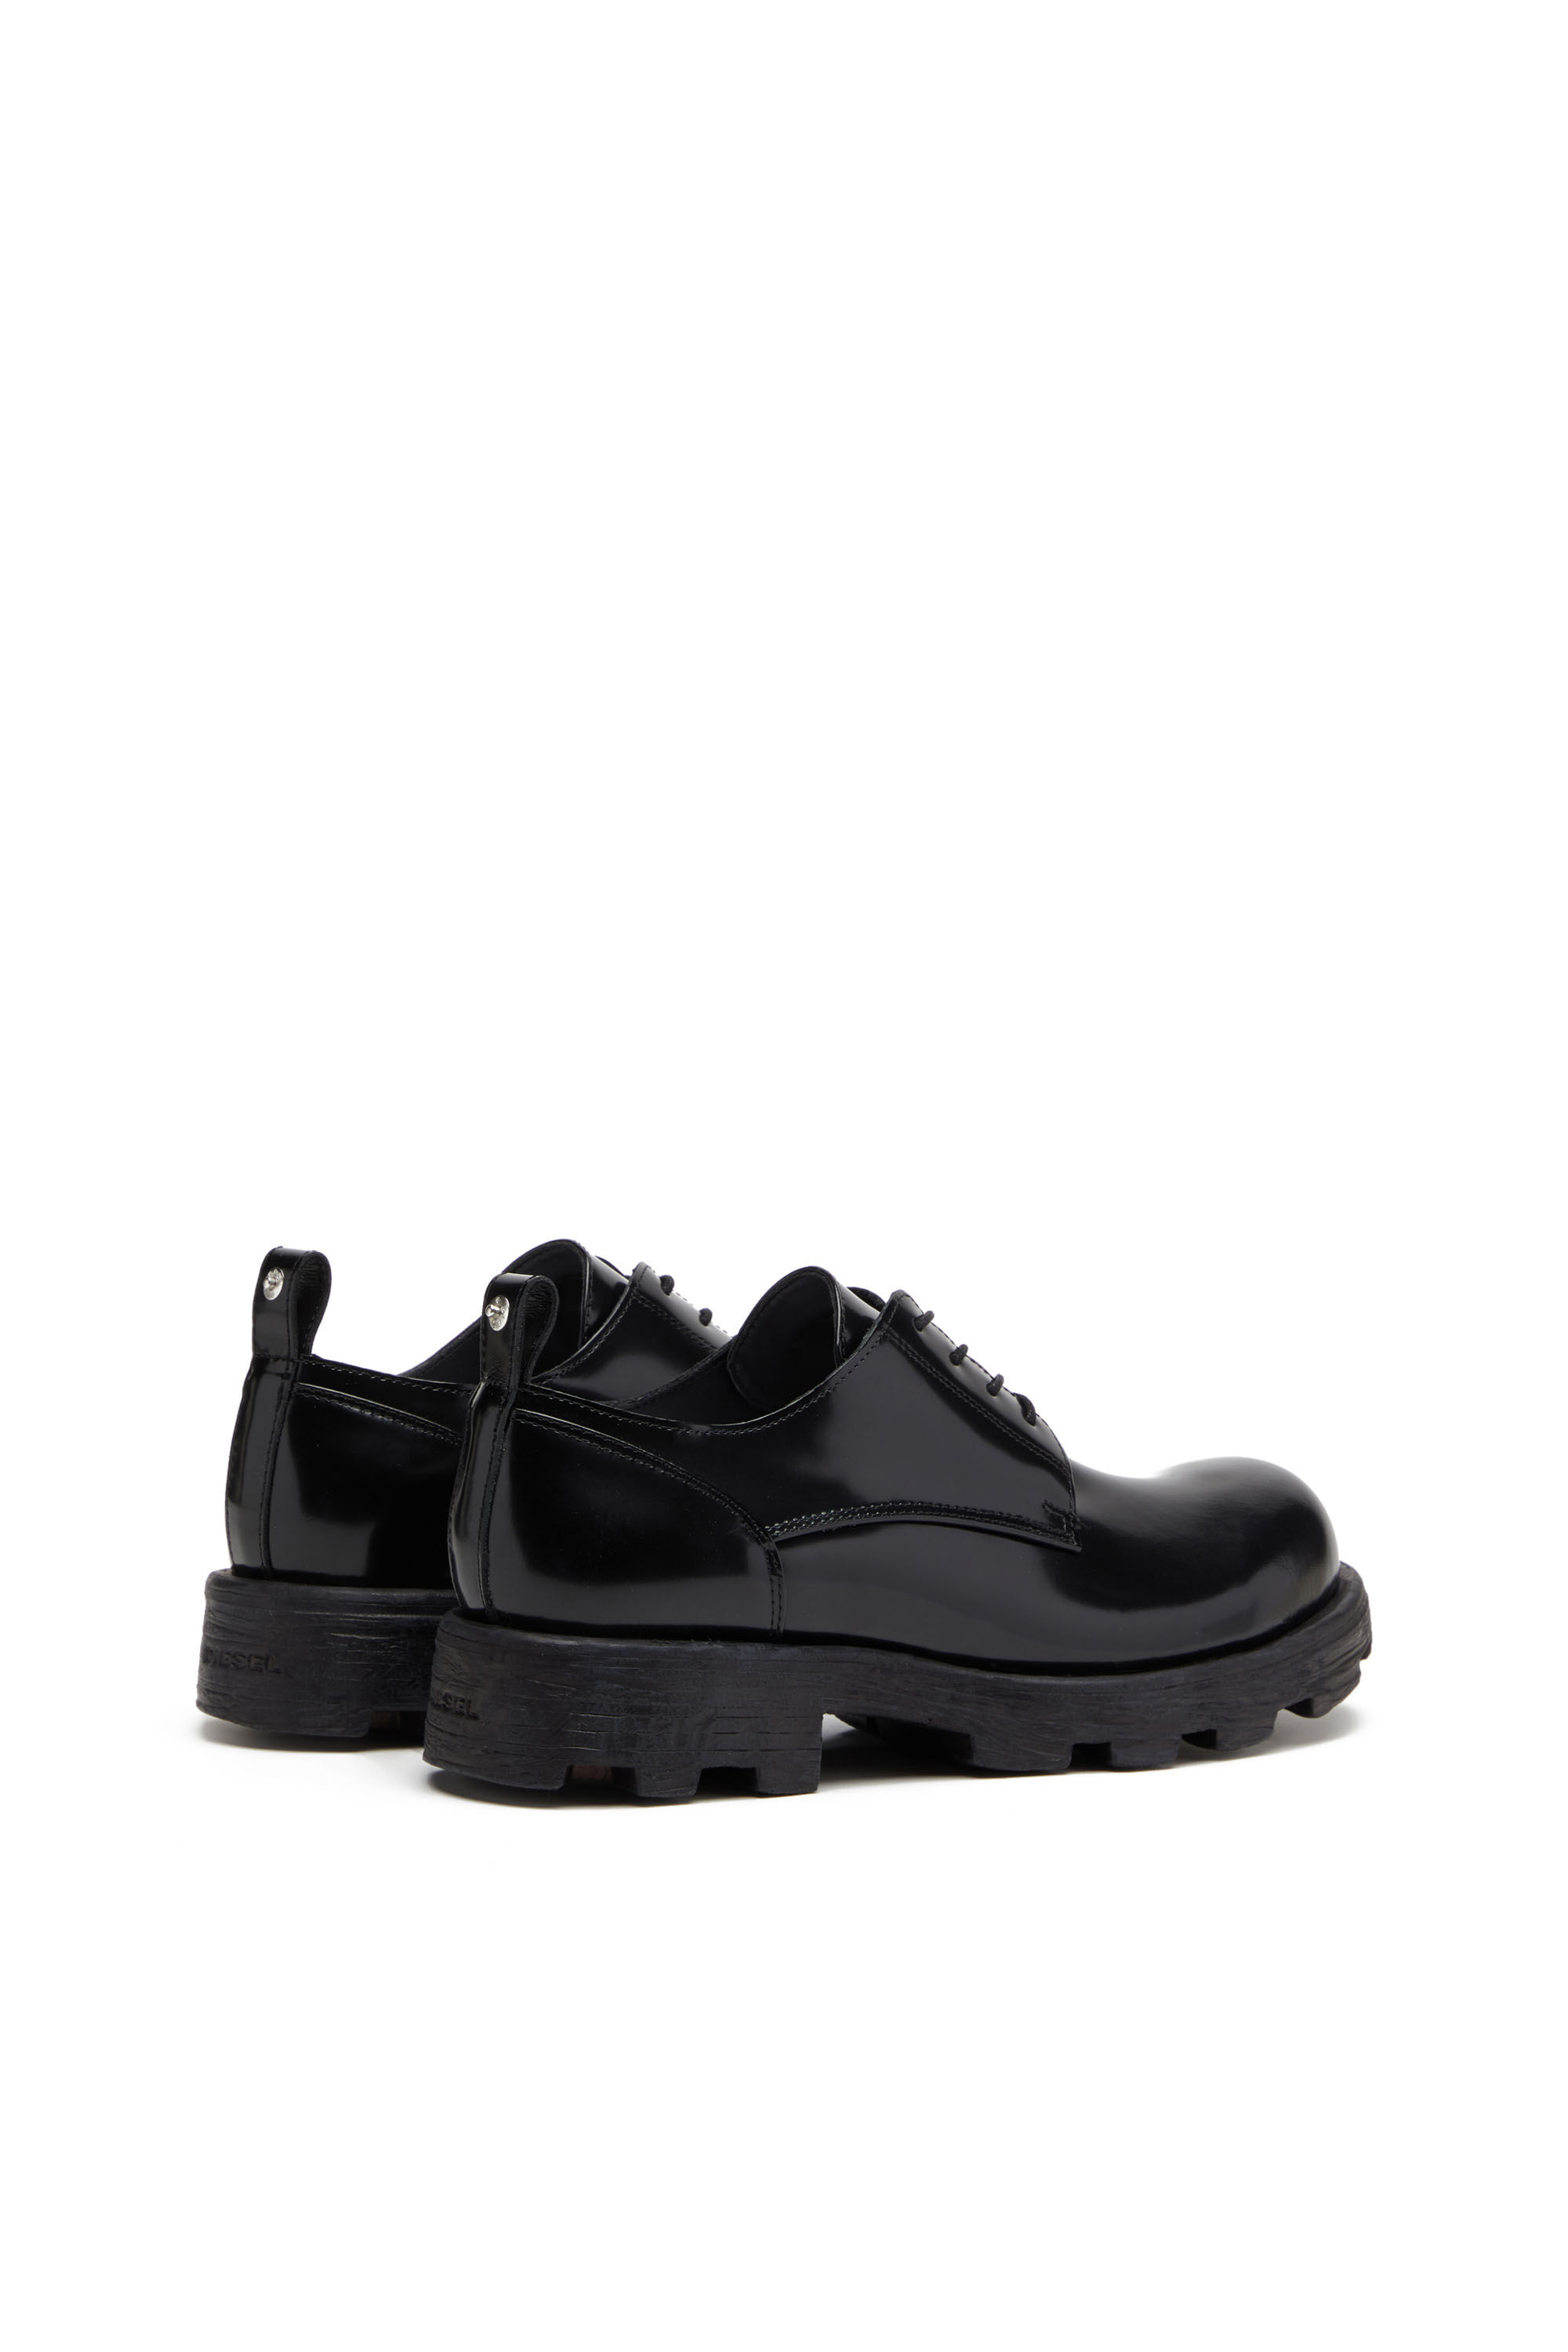 Diesel - D-HAMMER SH, Man D-Hammer SH - Lace-up shoes in shiny leather in Black - Image 3